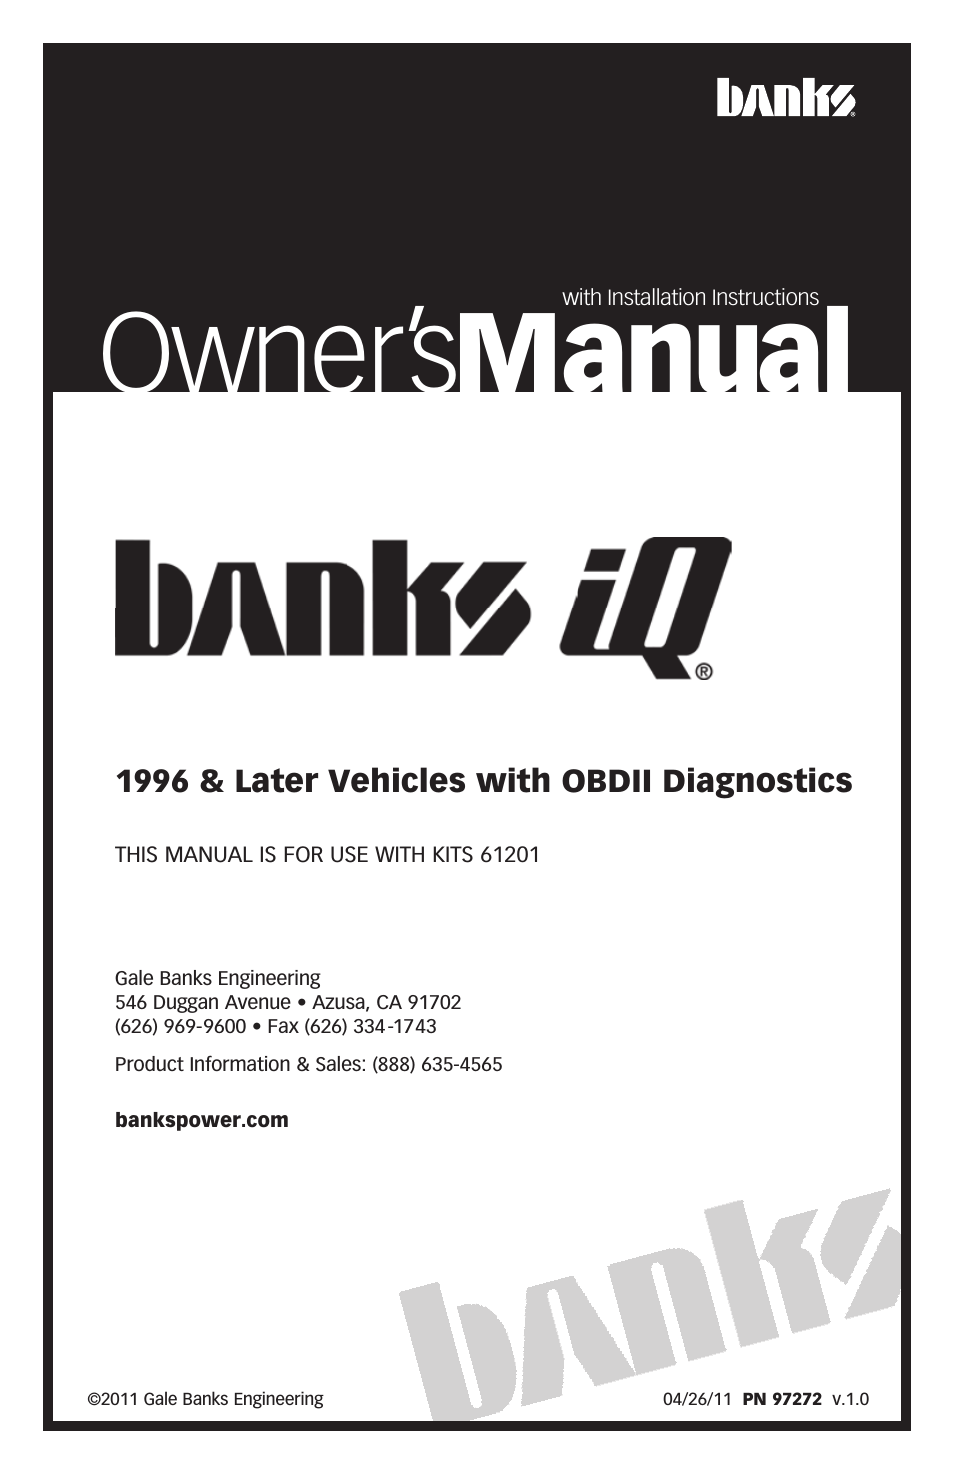 Interface- Banks iQ 1996 & Later Vehicles with OBDII Diagnostics